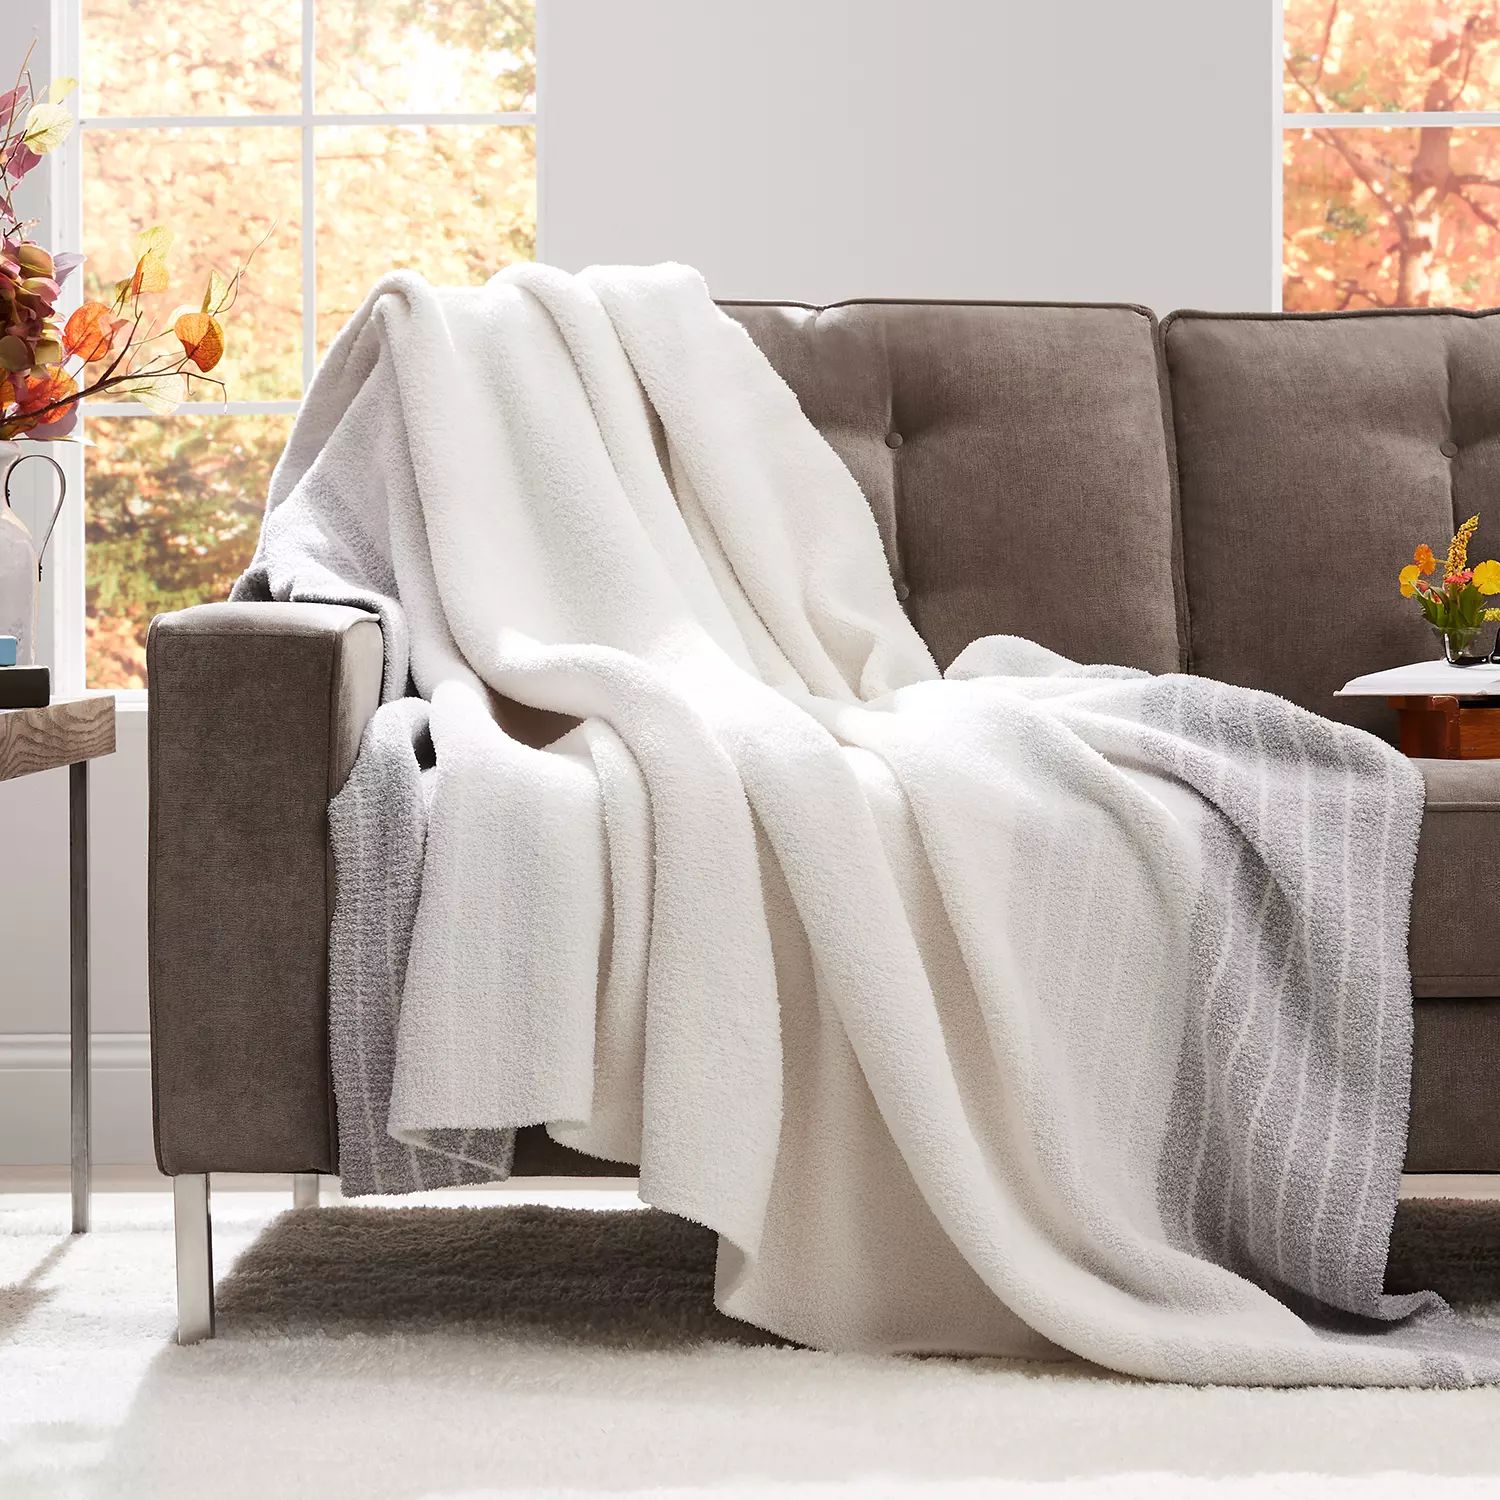 Member’s Mark Heathered Border Cozy Knit Throw (Assorted Colors) | Sam's Club